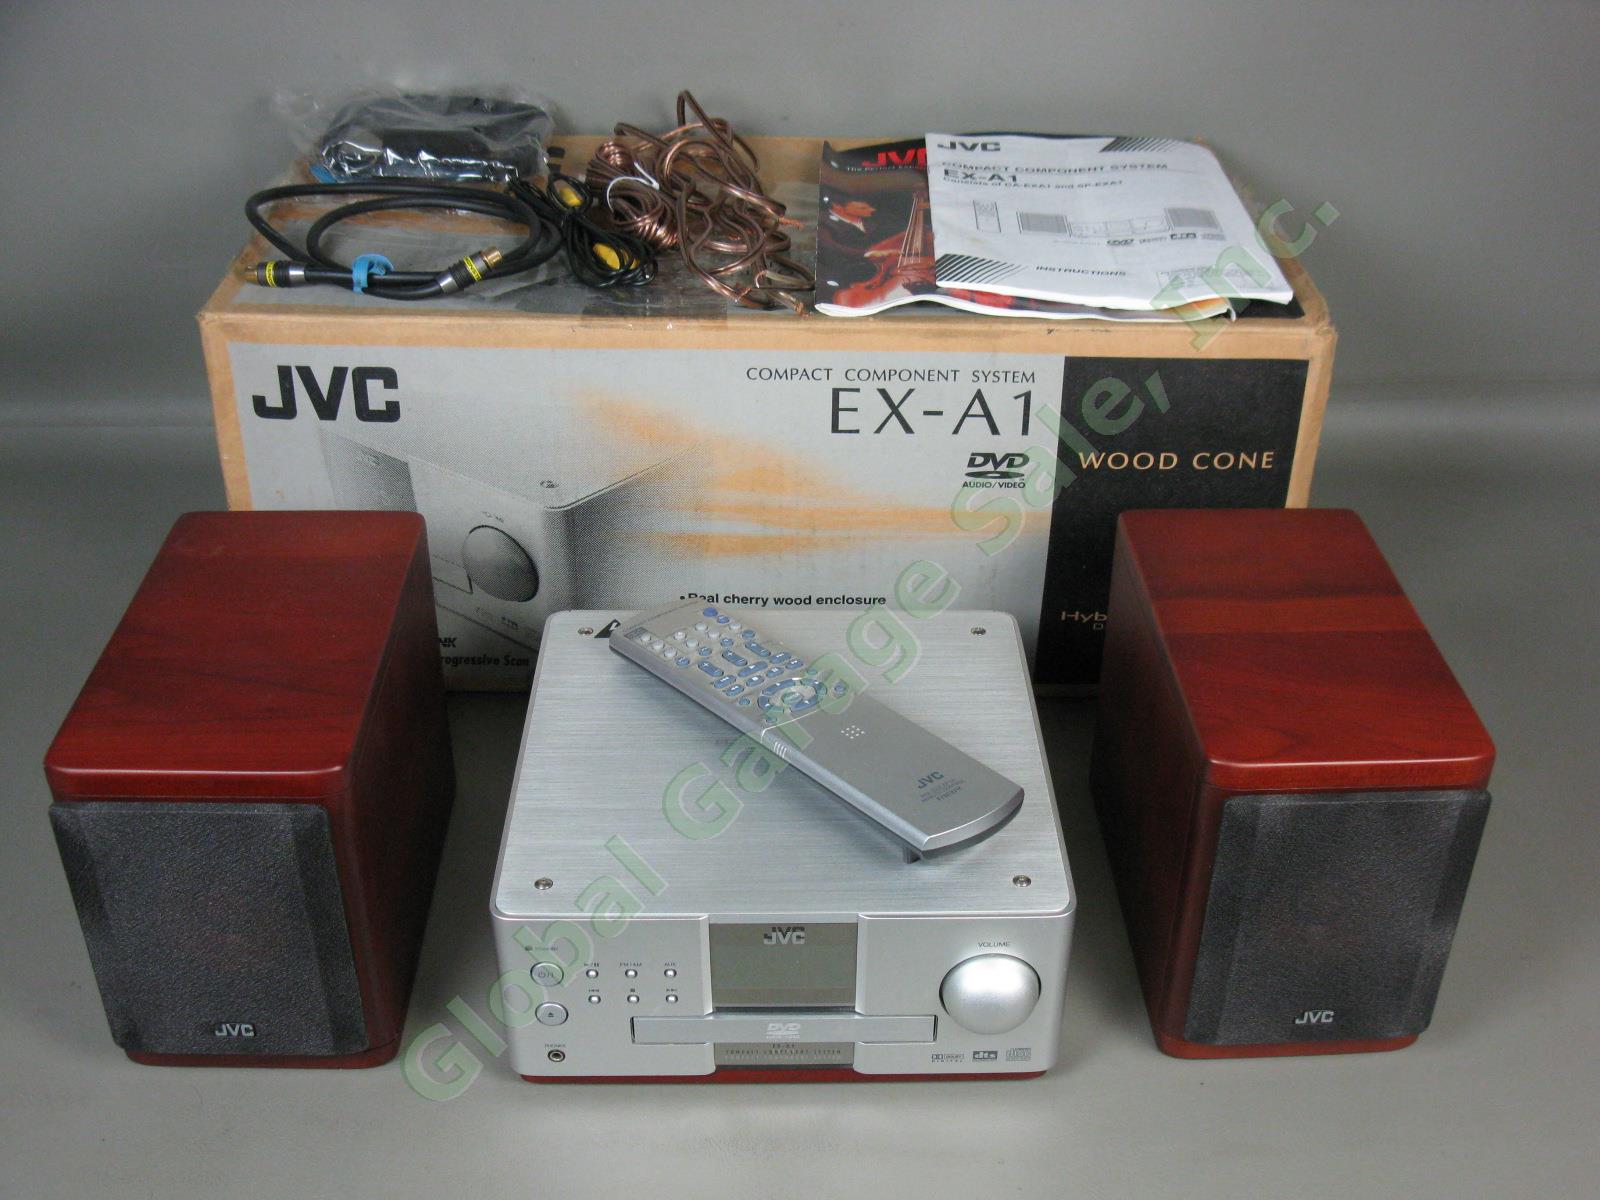 JVC EX-A1 Compact Stereo System DVD/CD Receiver Wood Cone Speakers Remote NR